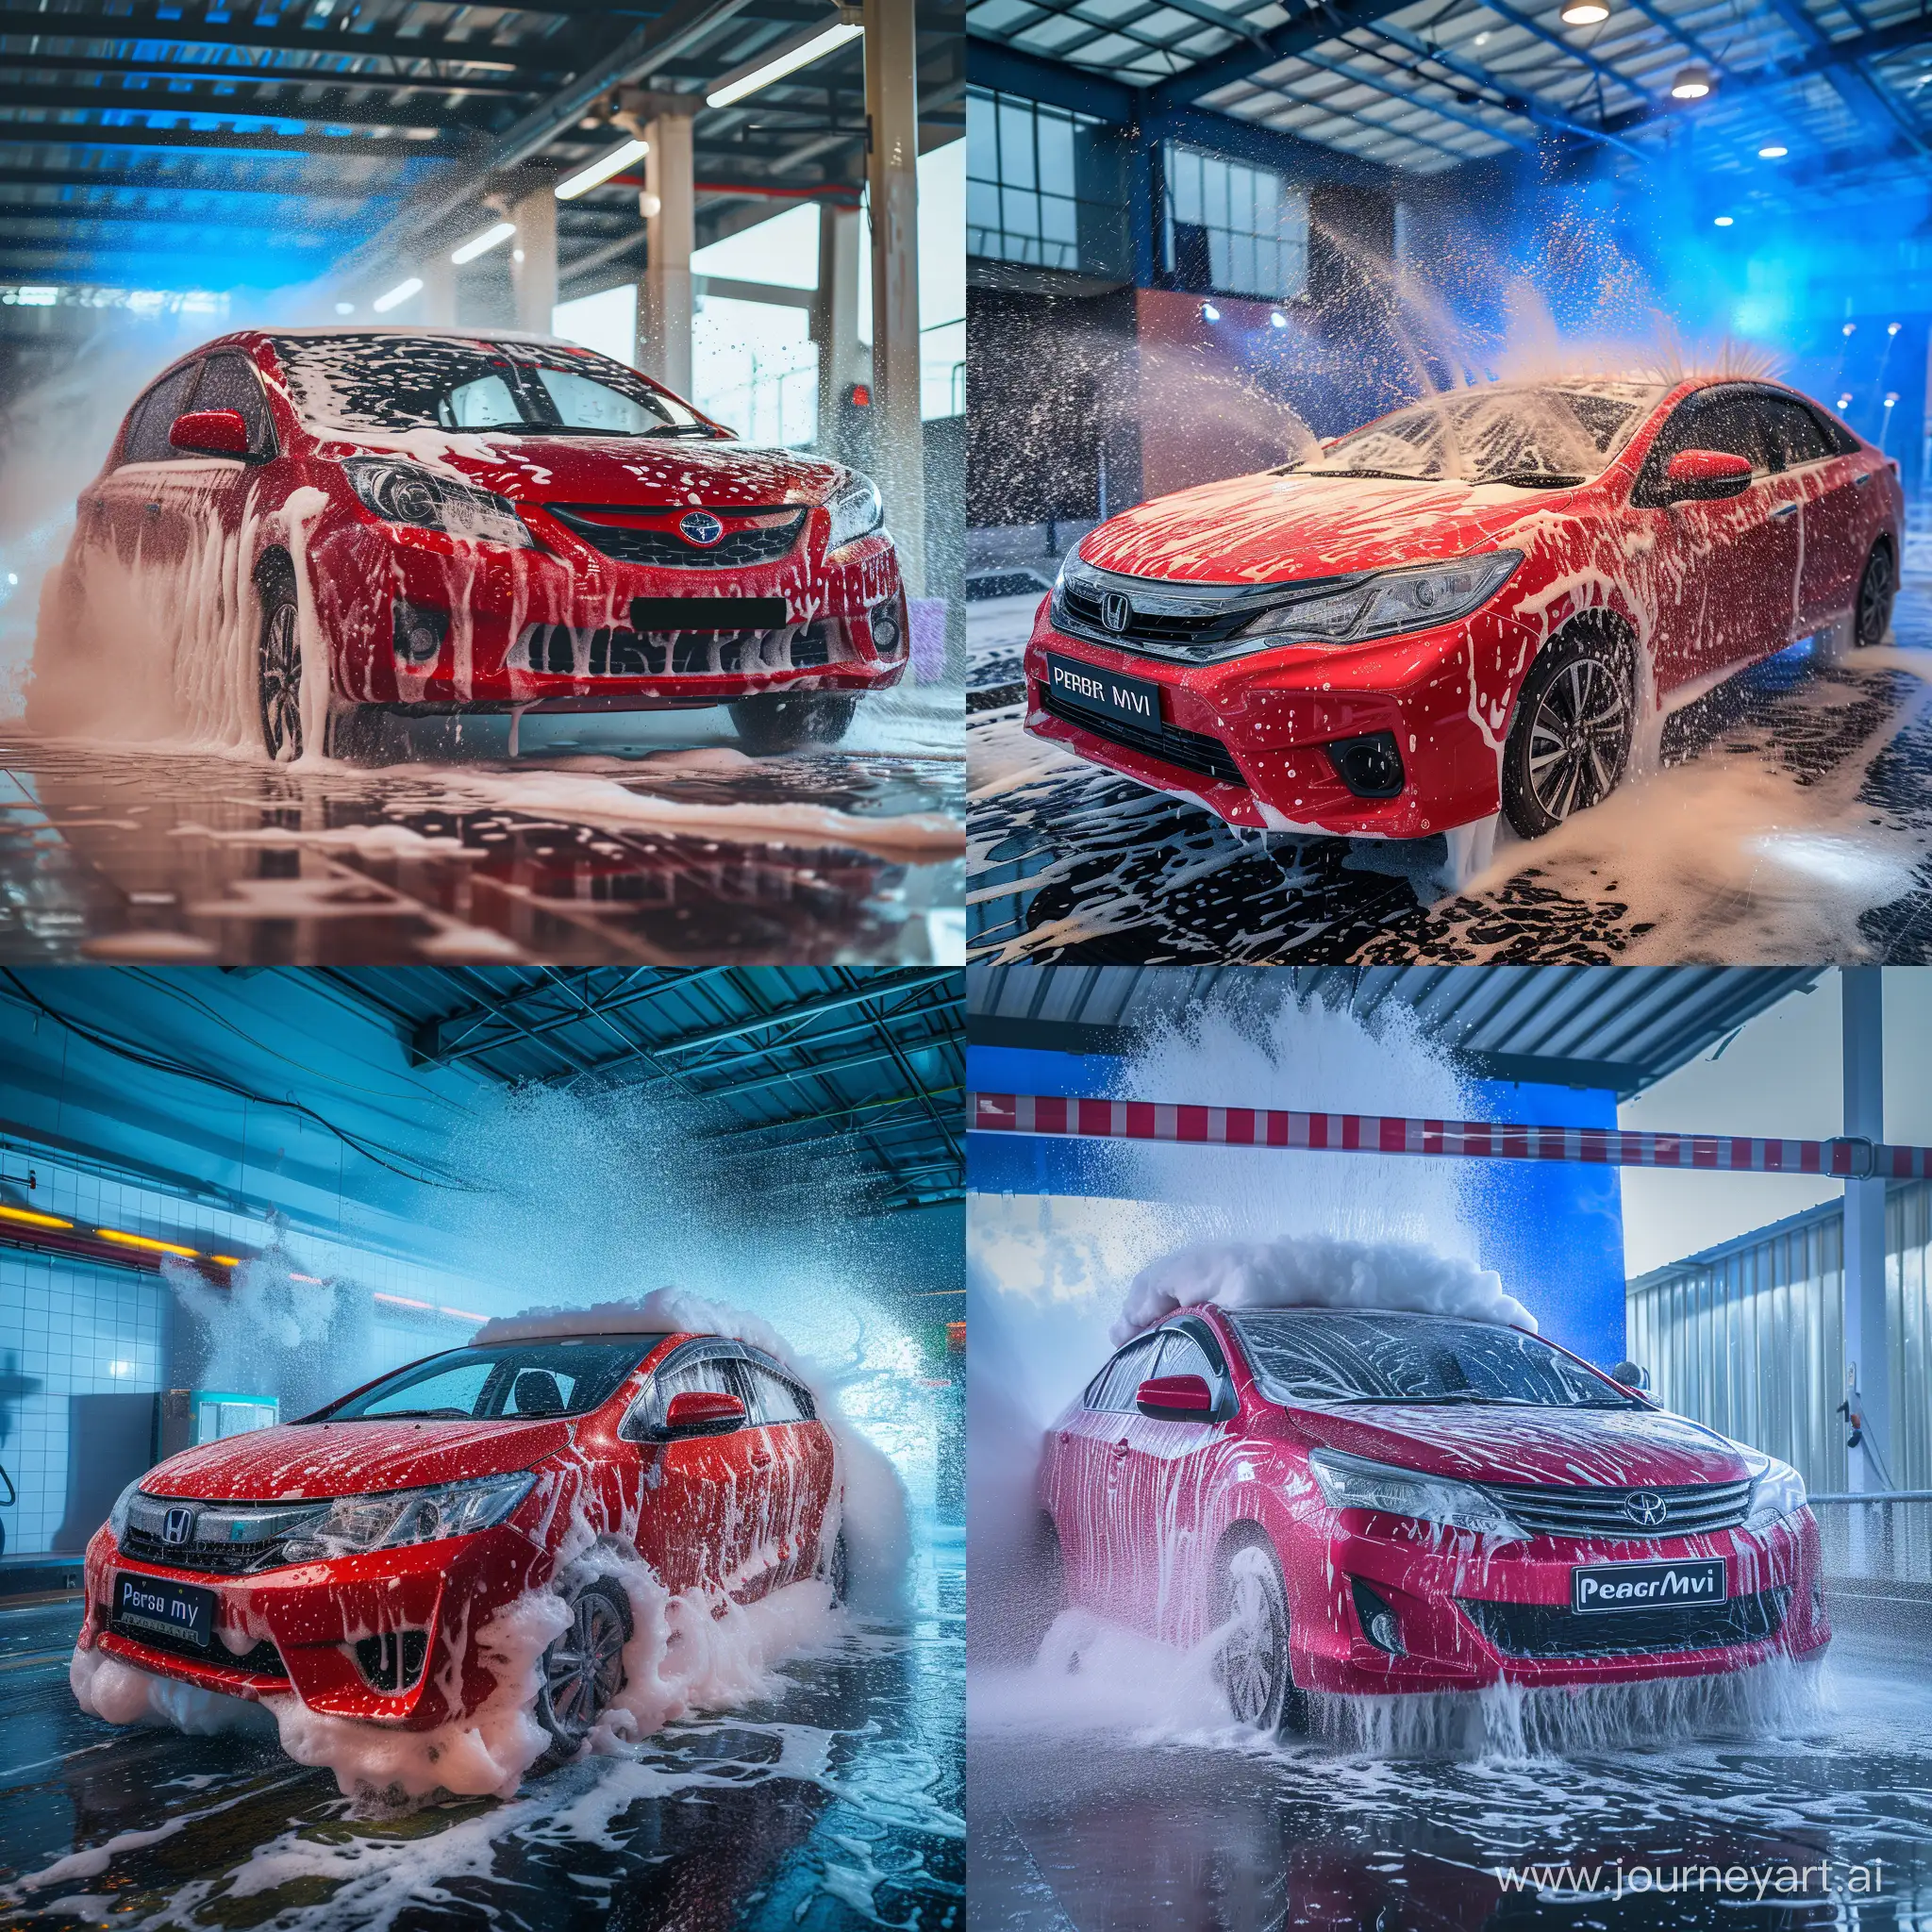 Efficient-Red-Perodua-Myvi-Car-Wash-with-Modern-Foam-and-Water-Spray